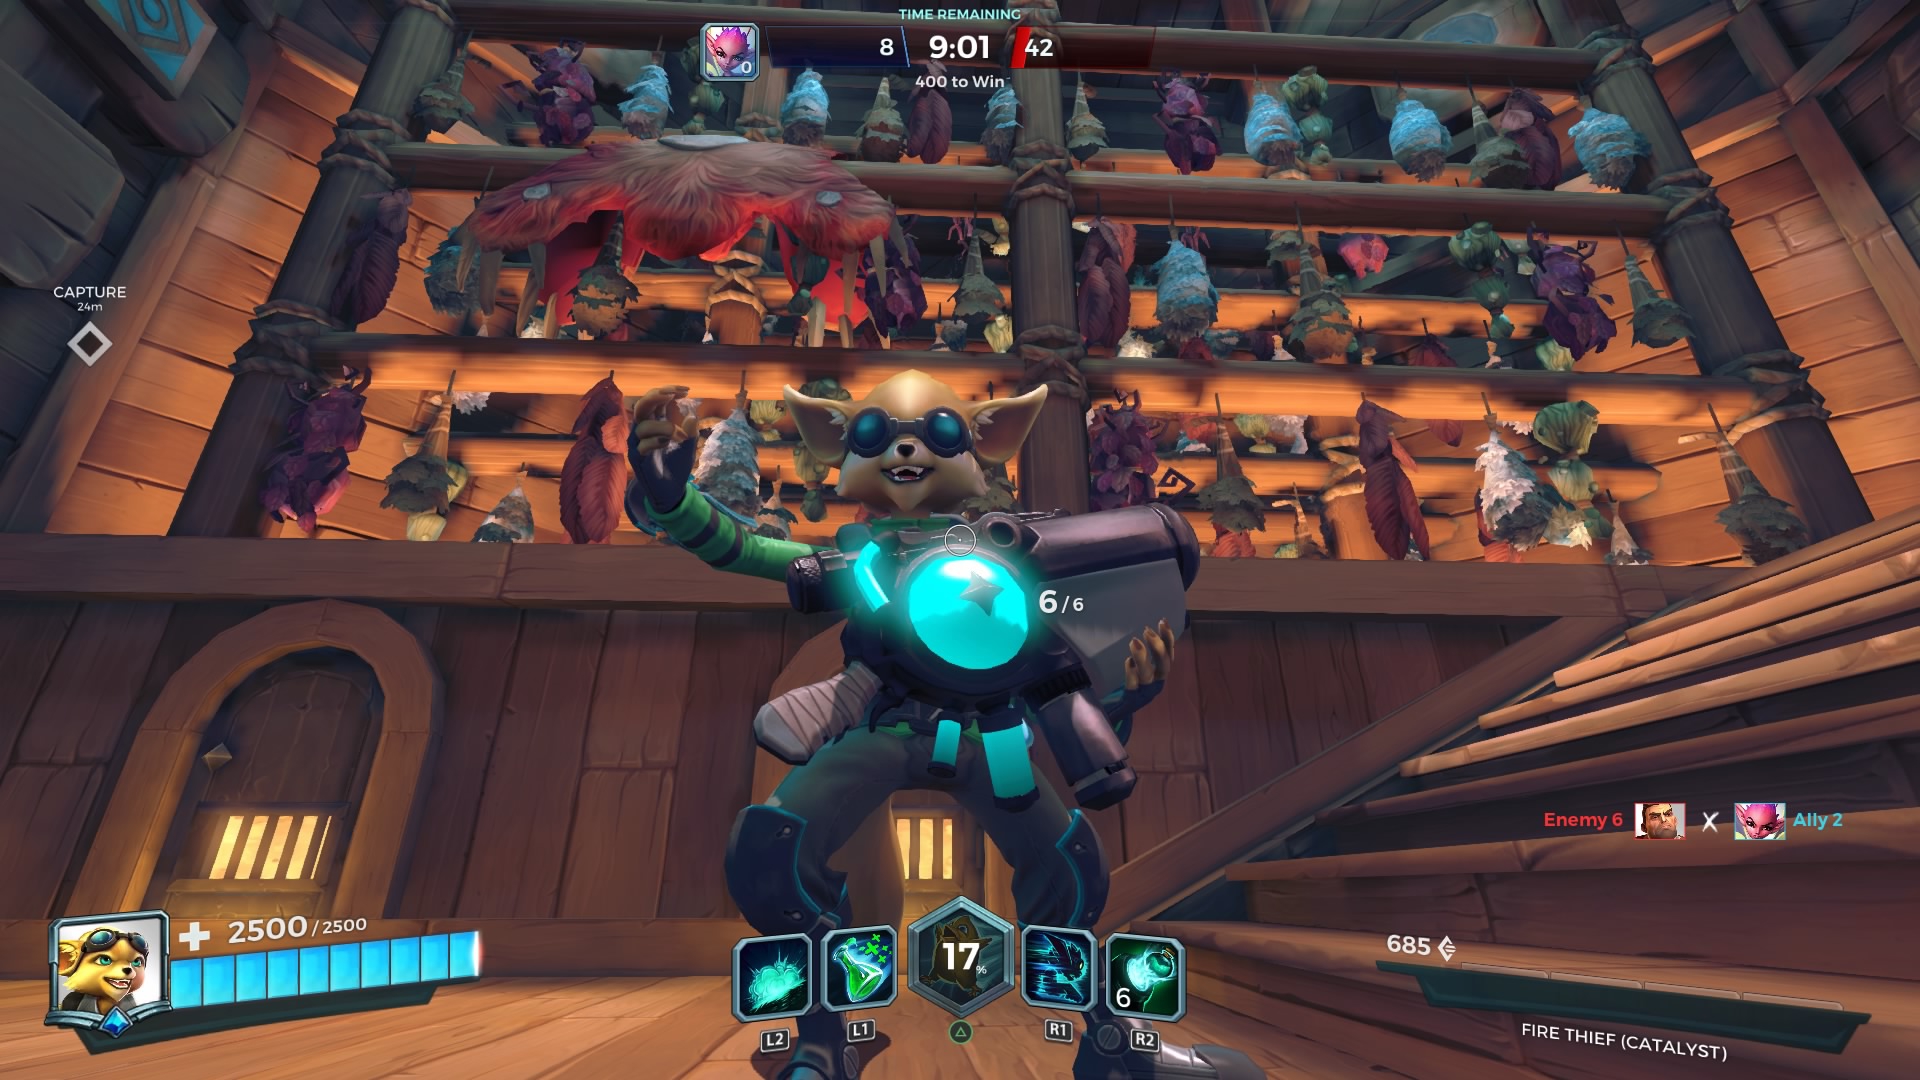 Pip elegantly playing his potion launcher.